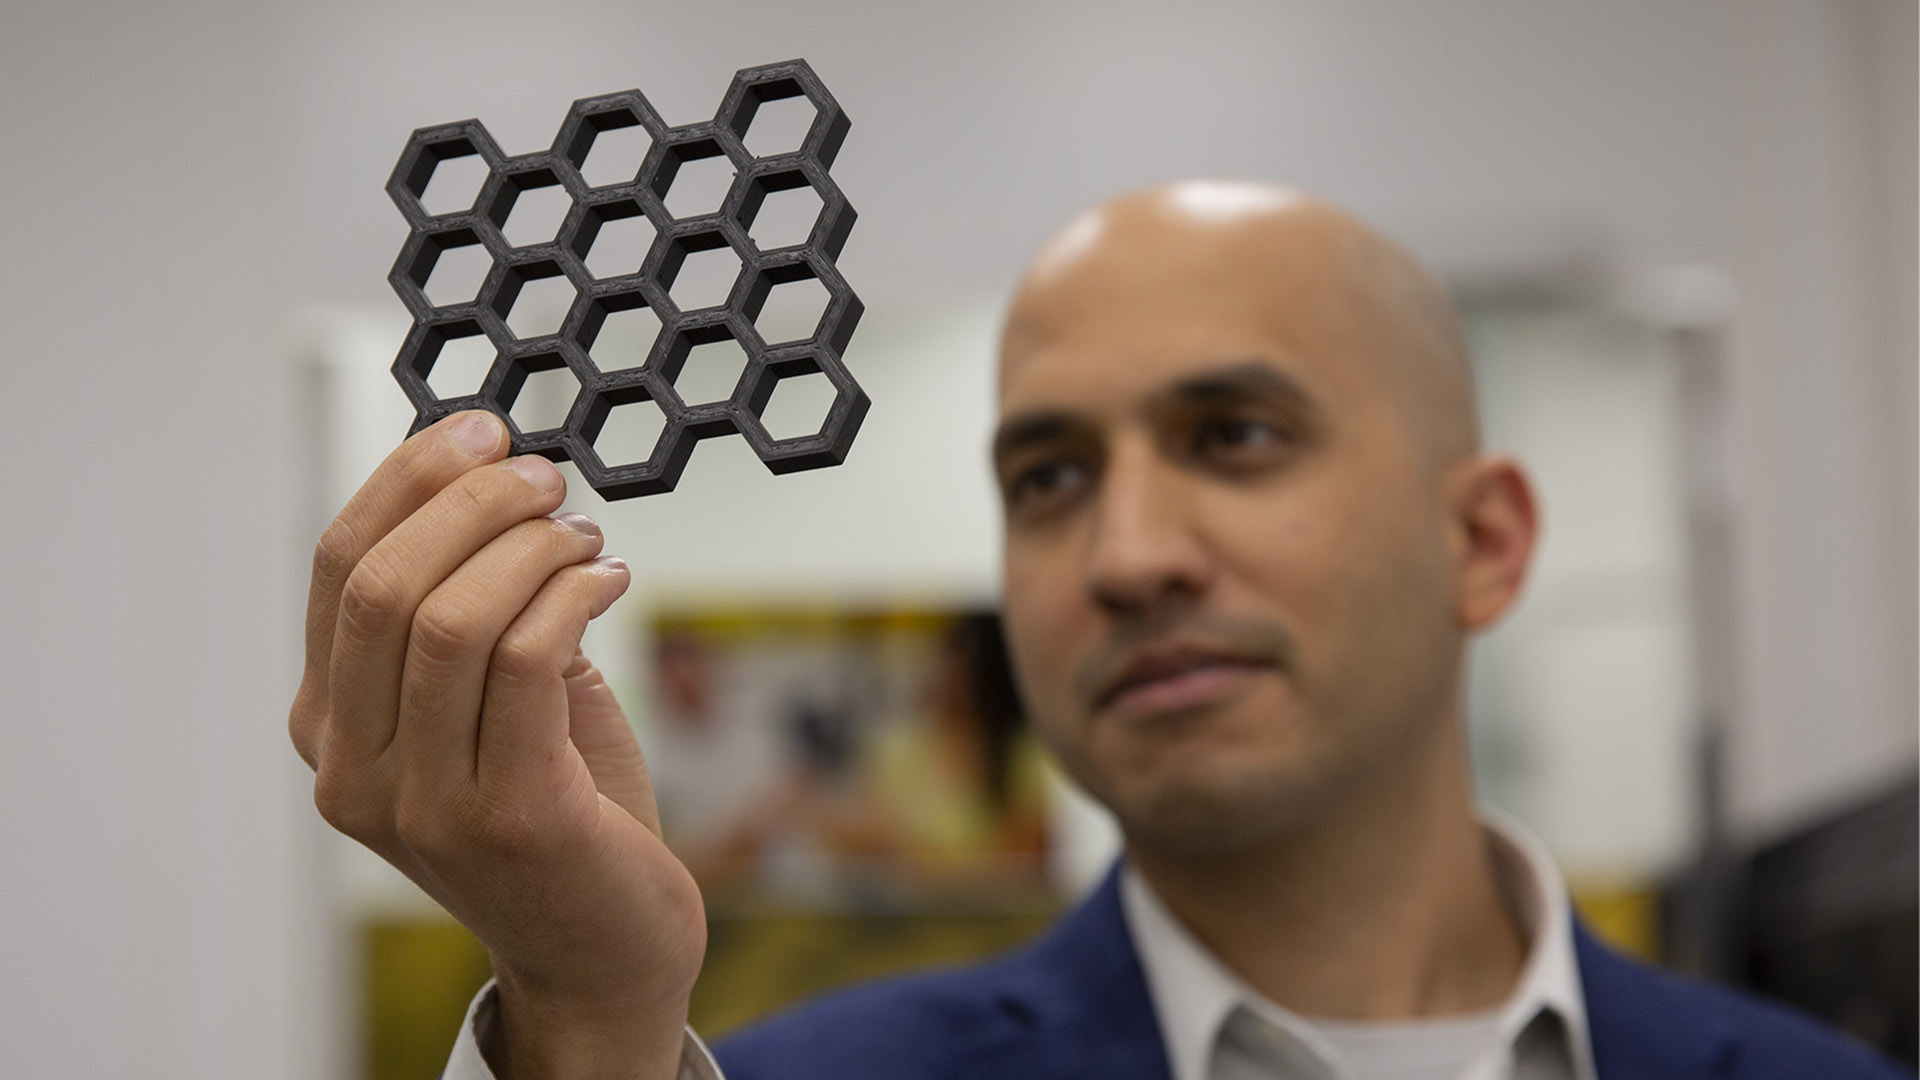 Dhruv Bhate holding up a 3D printed object